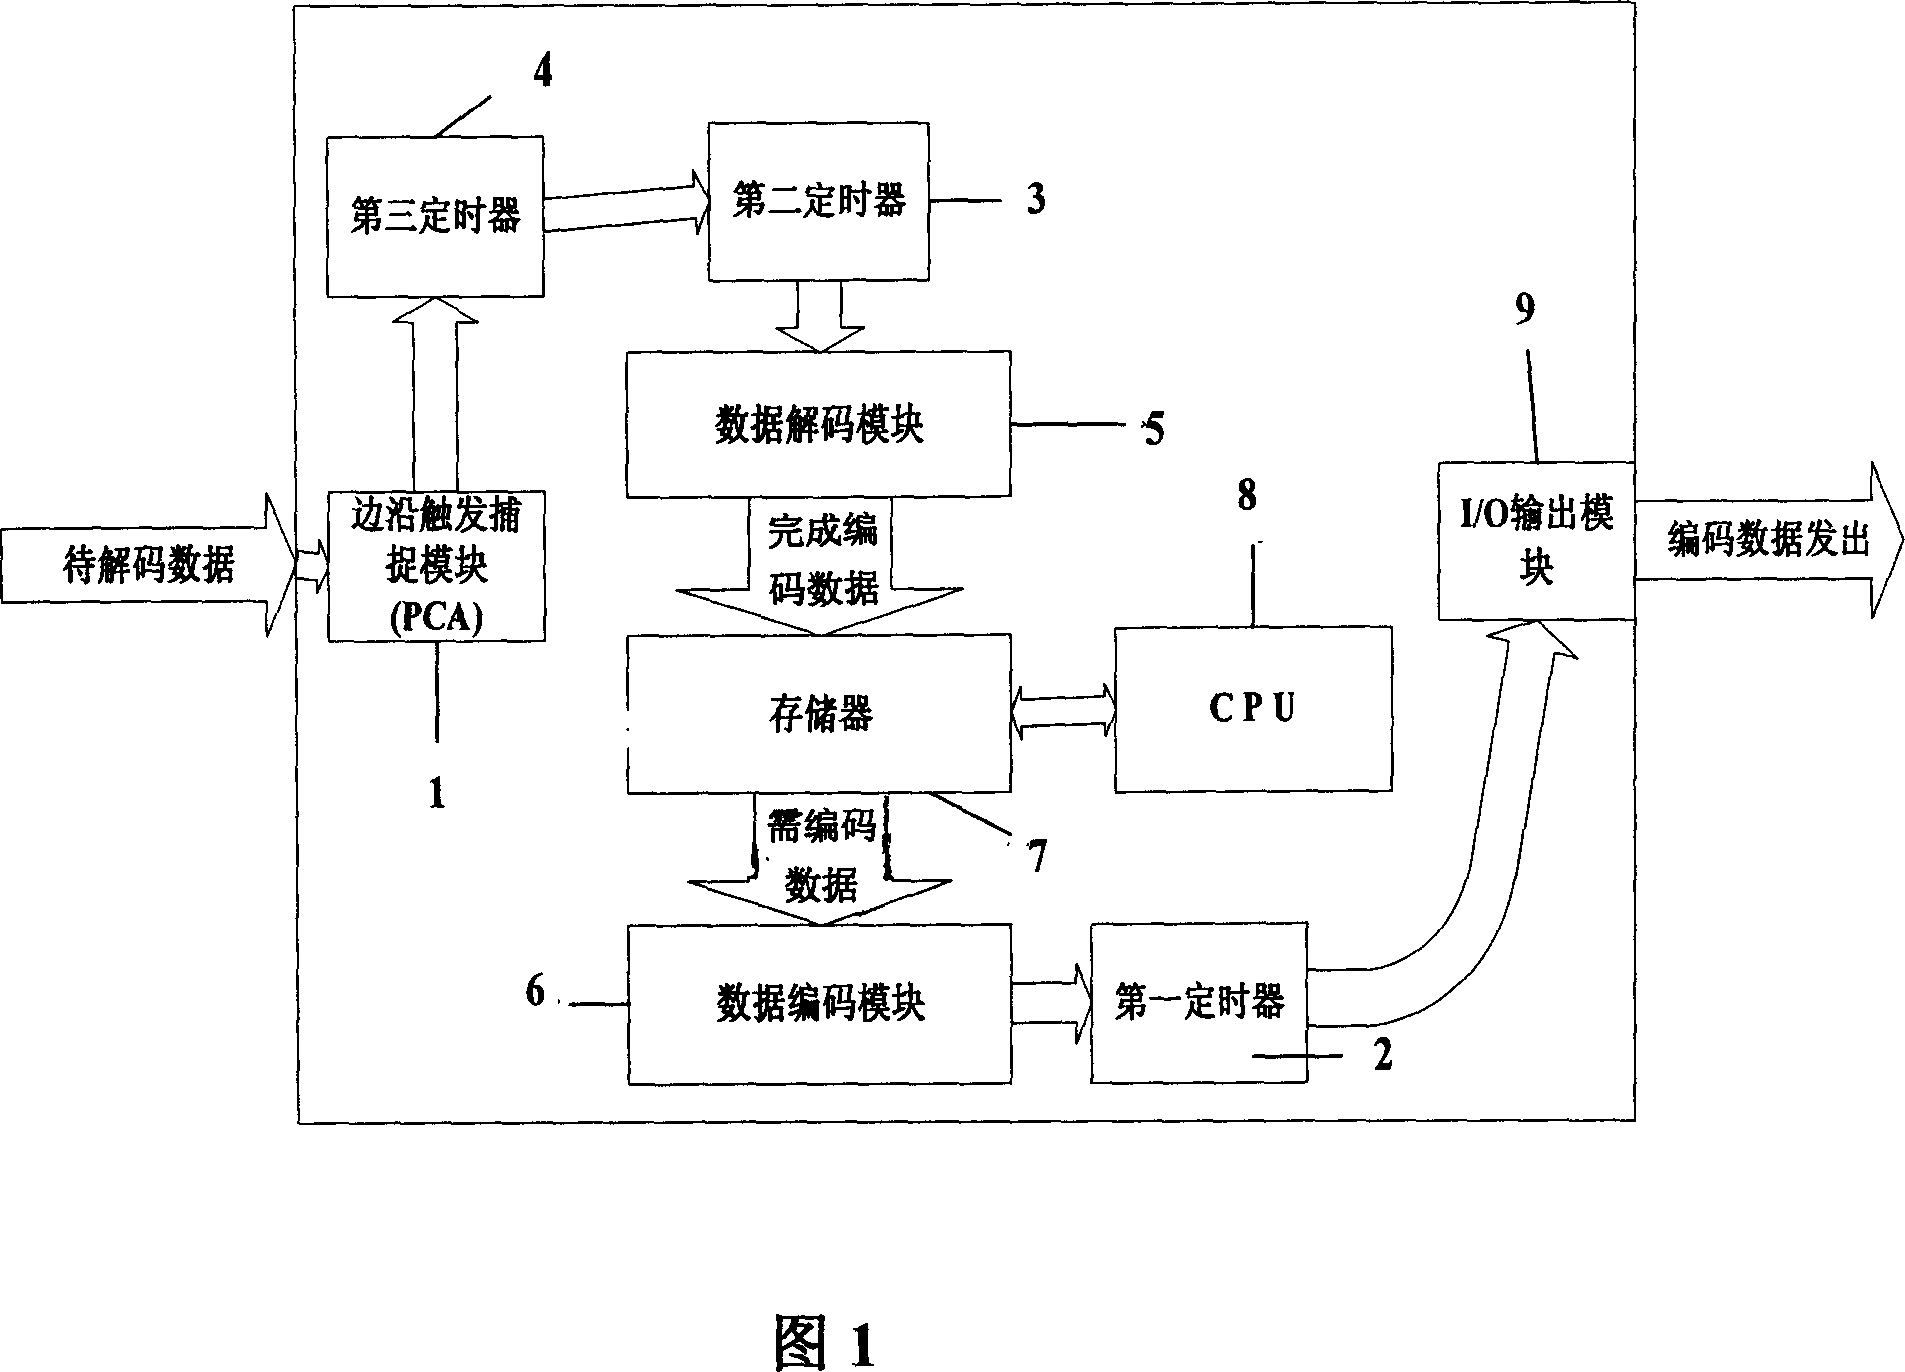 Communication terminal module with functions of encoding and decoding capabilities, and method for receiving and sending data